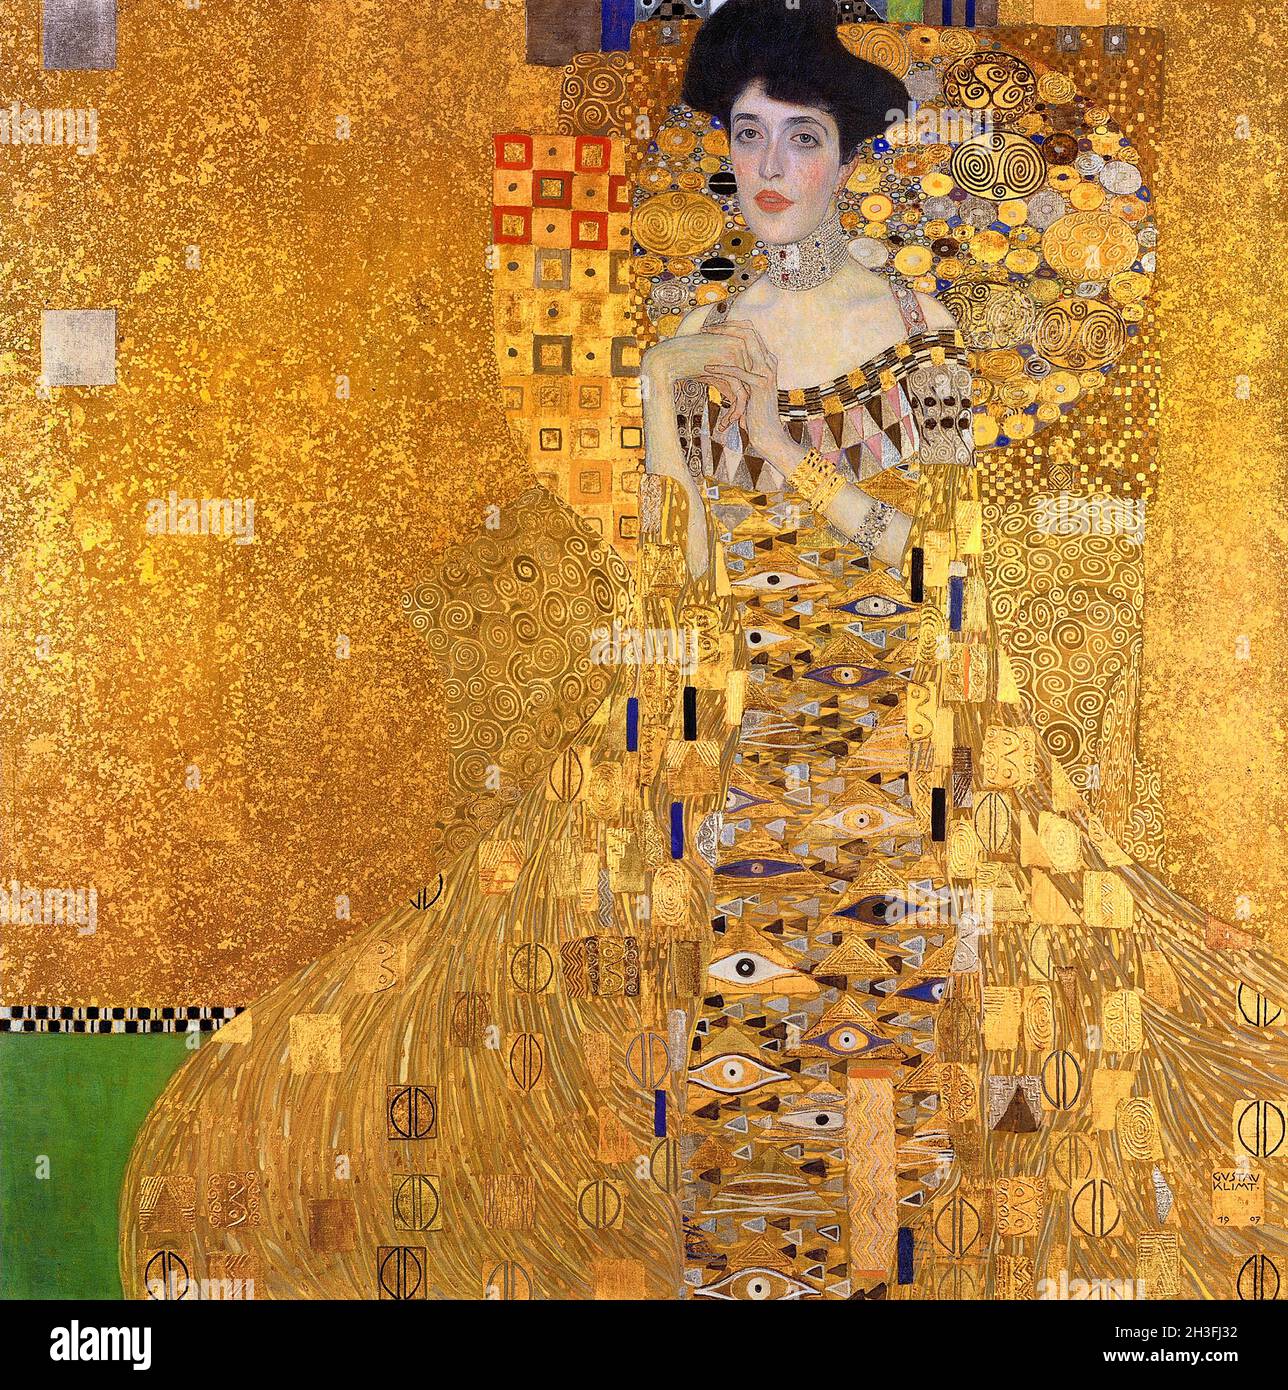 Gustav Klimt. Painting entitled 'Portrait of Adele Bloch-Bauer I (Adele Bloch-Bauer I)'  by Gustav Klimt (1862-1918), oil, silver and gold on canvas, 1907 Stock Photo